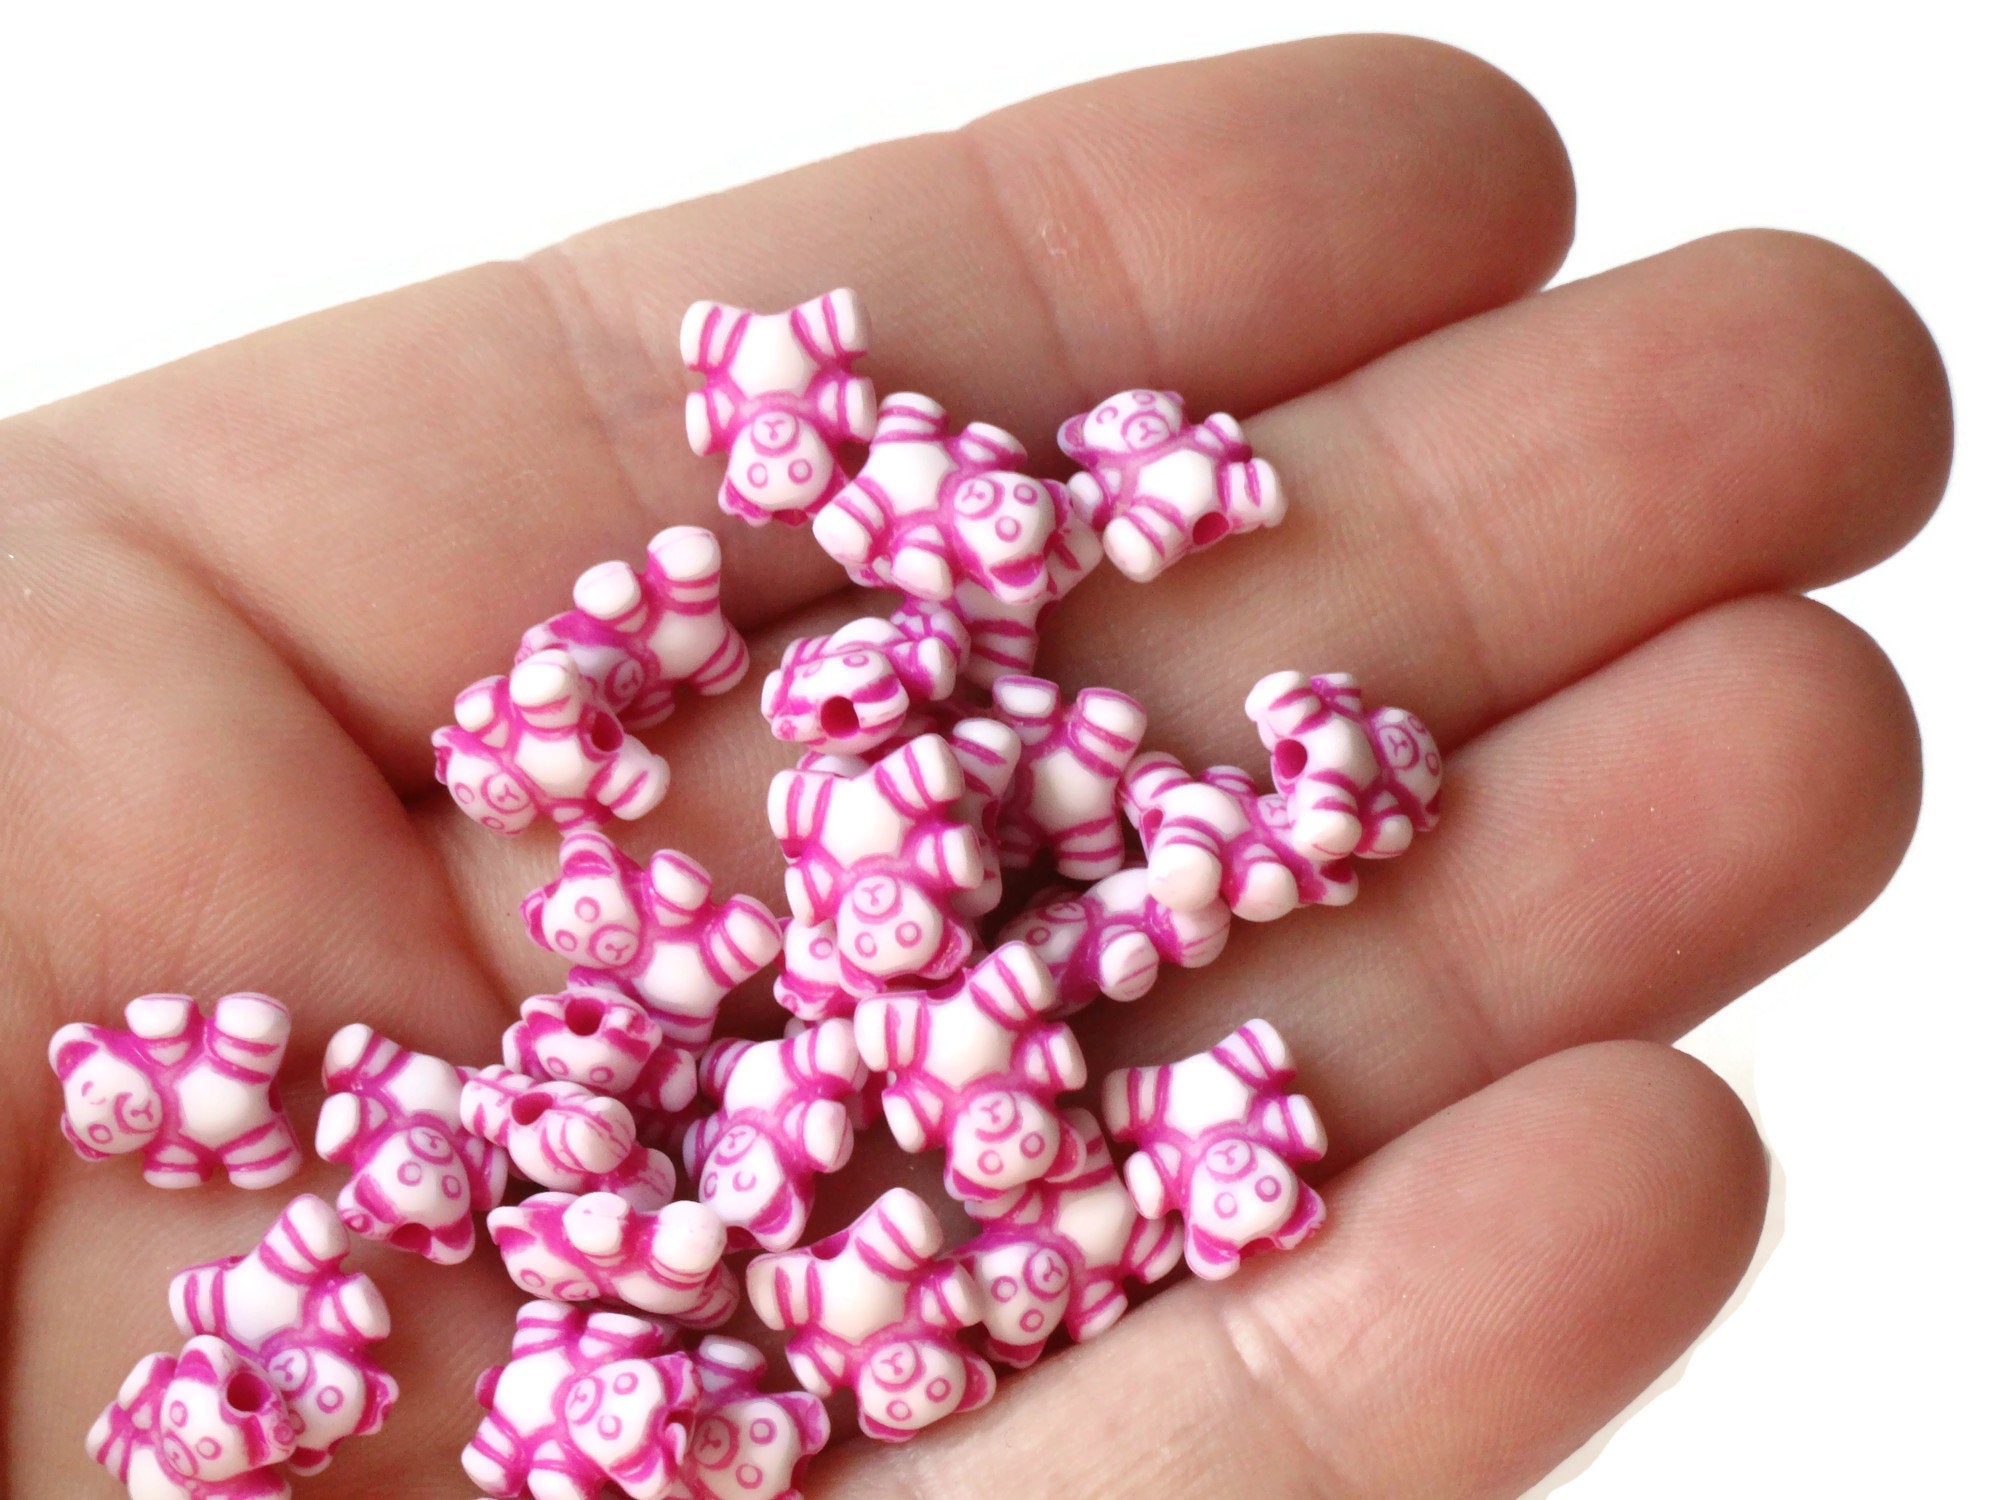 100 9mm Magenta Pink Teddy Bear Beads Plastic Animal Beads Small Cute Toy Beads Kawaii Beads by Smileyboy | Michaels